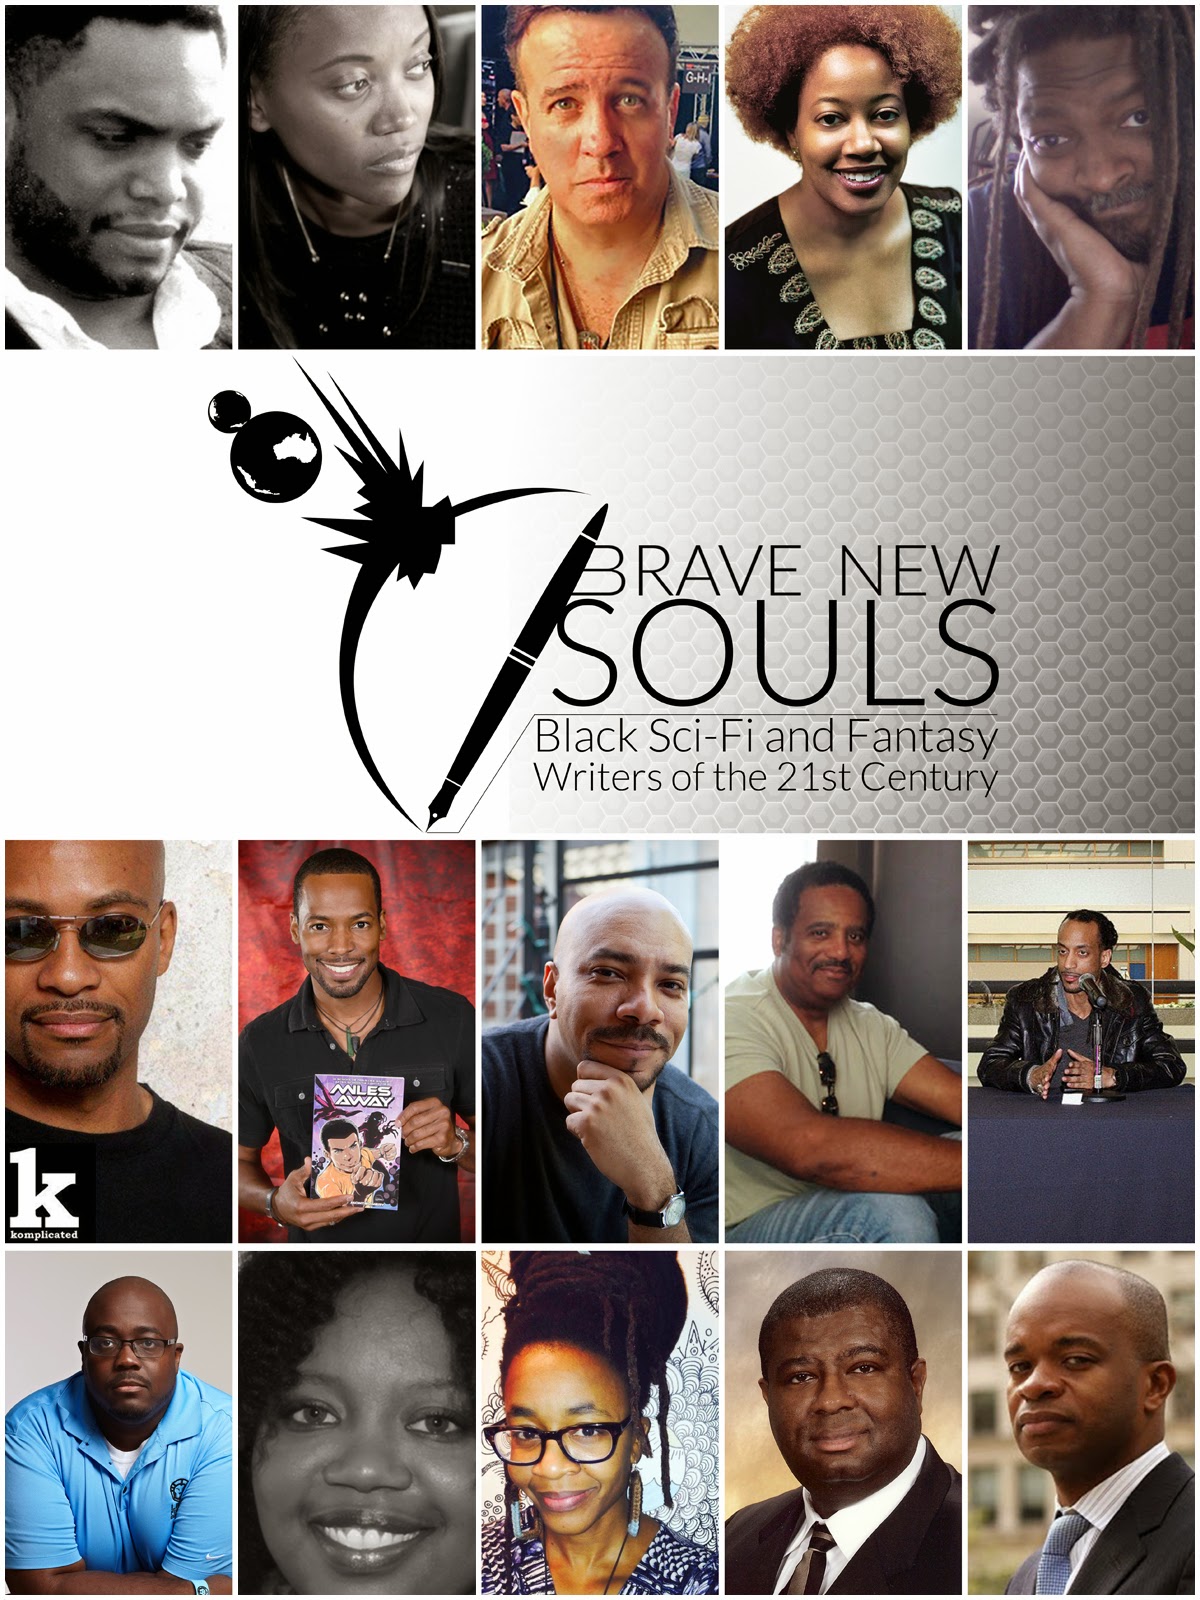 affiche du film Brave New Souls: Black Sci-Fi and Fantasy Writers of the 21st Century